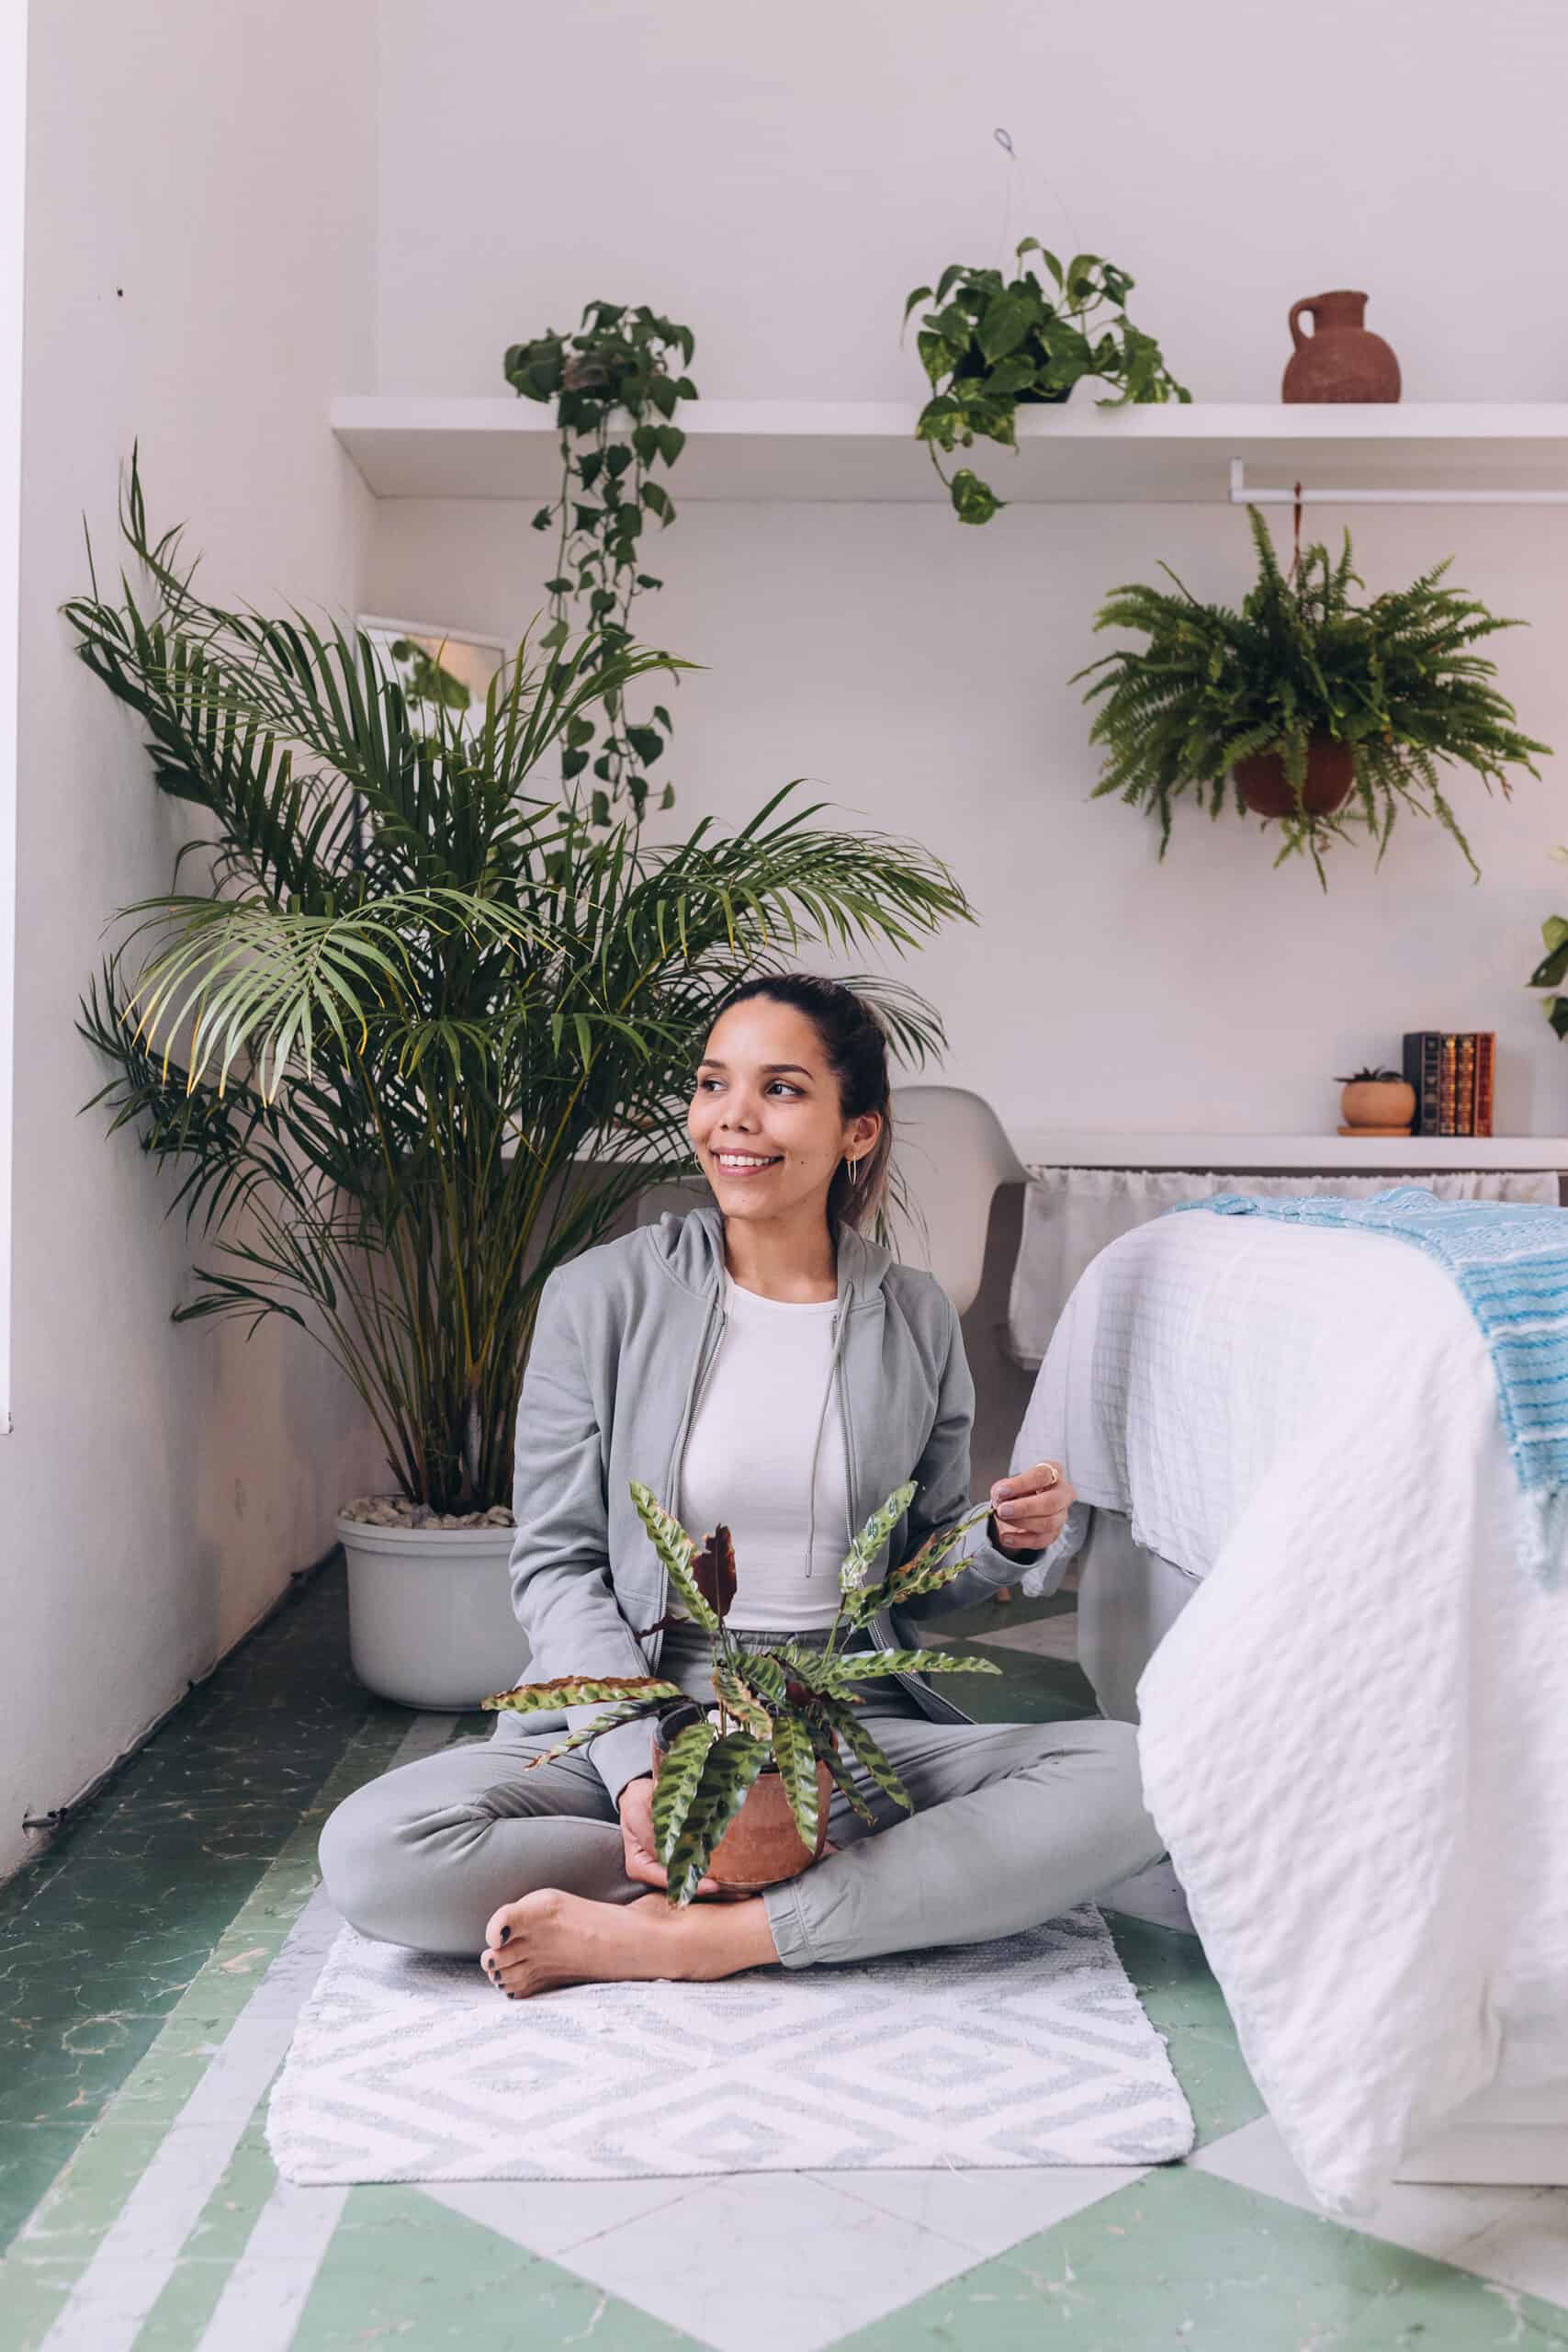 A woman sitting on the door smiling with a plant rattlesnake plant in her lap.